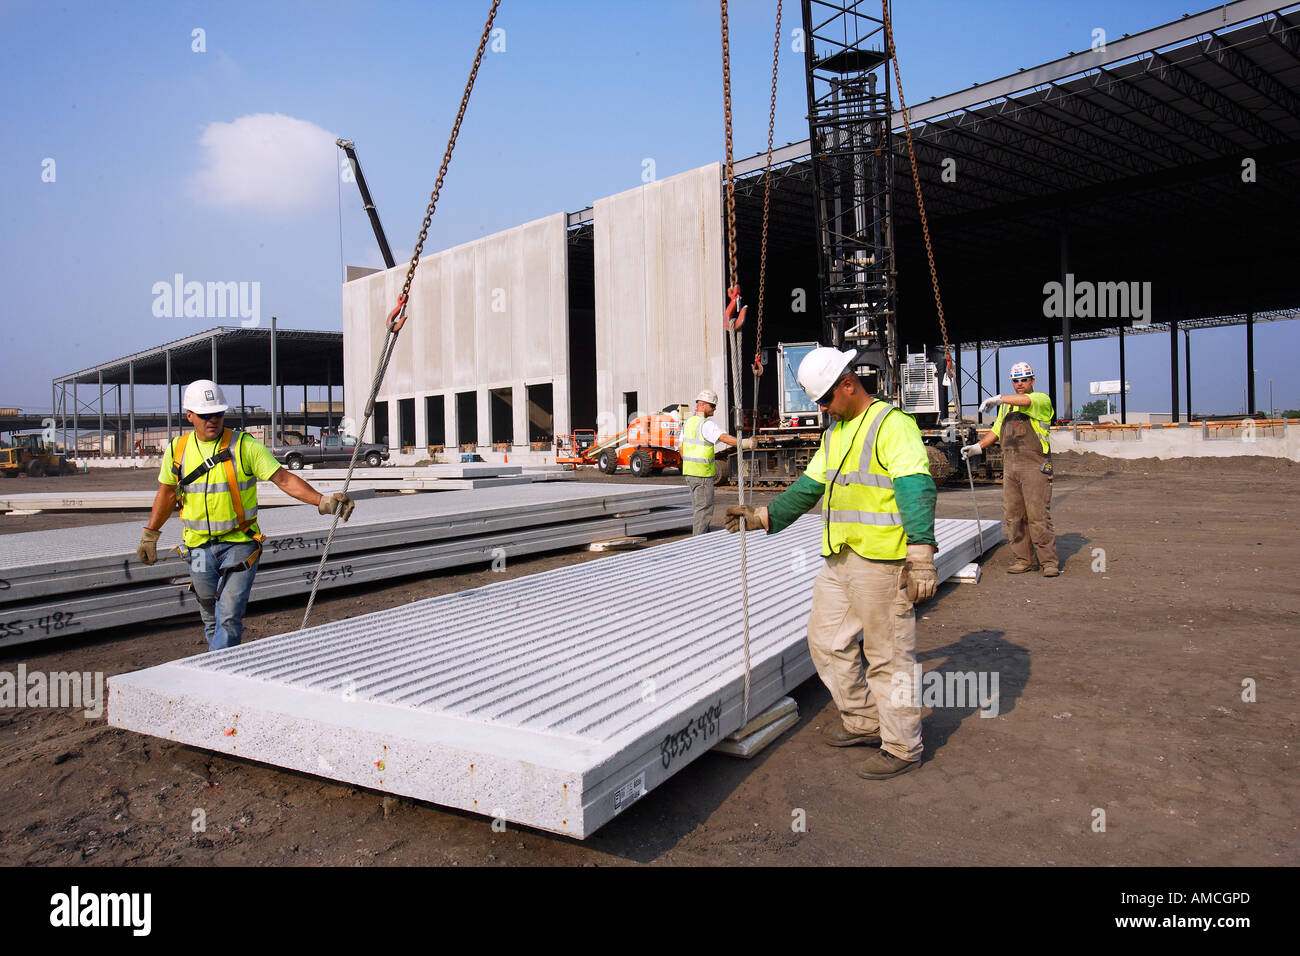 Warehouse Construction Using Prefabricated Concrete Wall Sections Stock